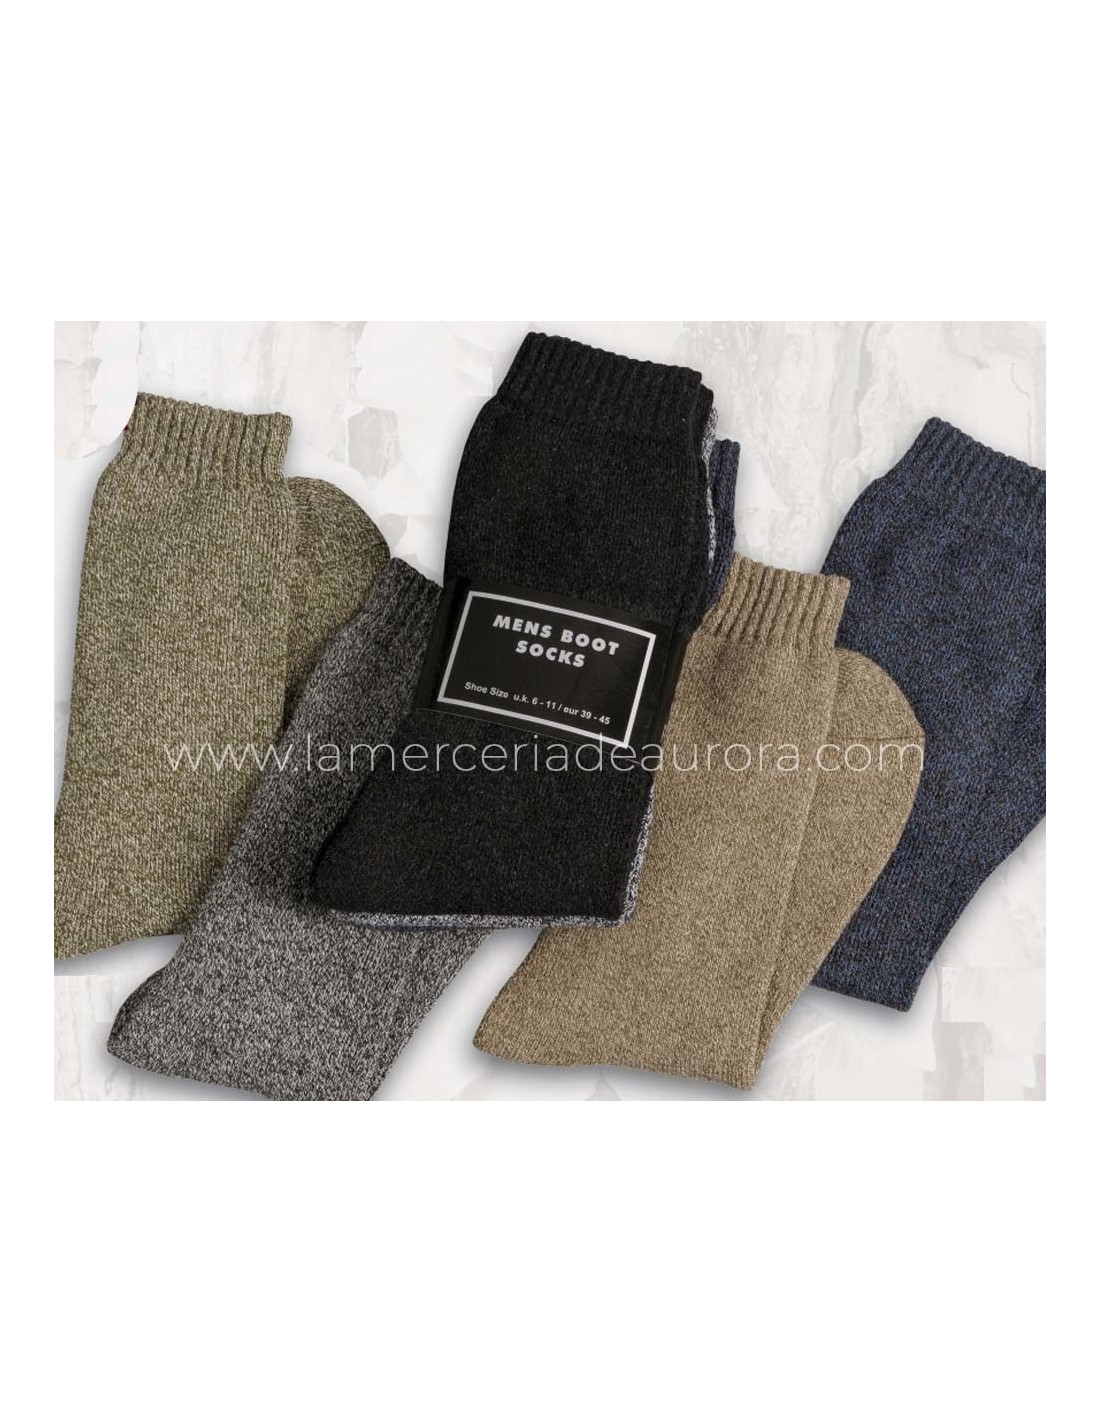 Pack 3 Calcetines Hombre, Calcetines para hombre